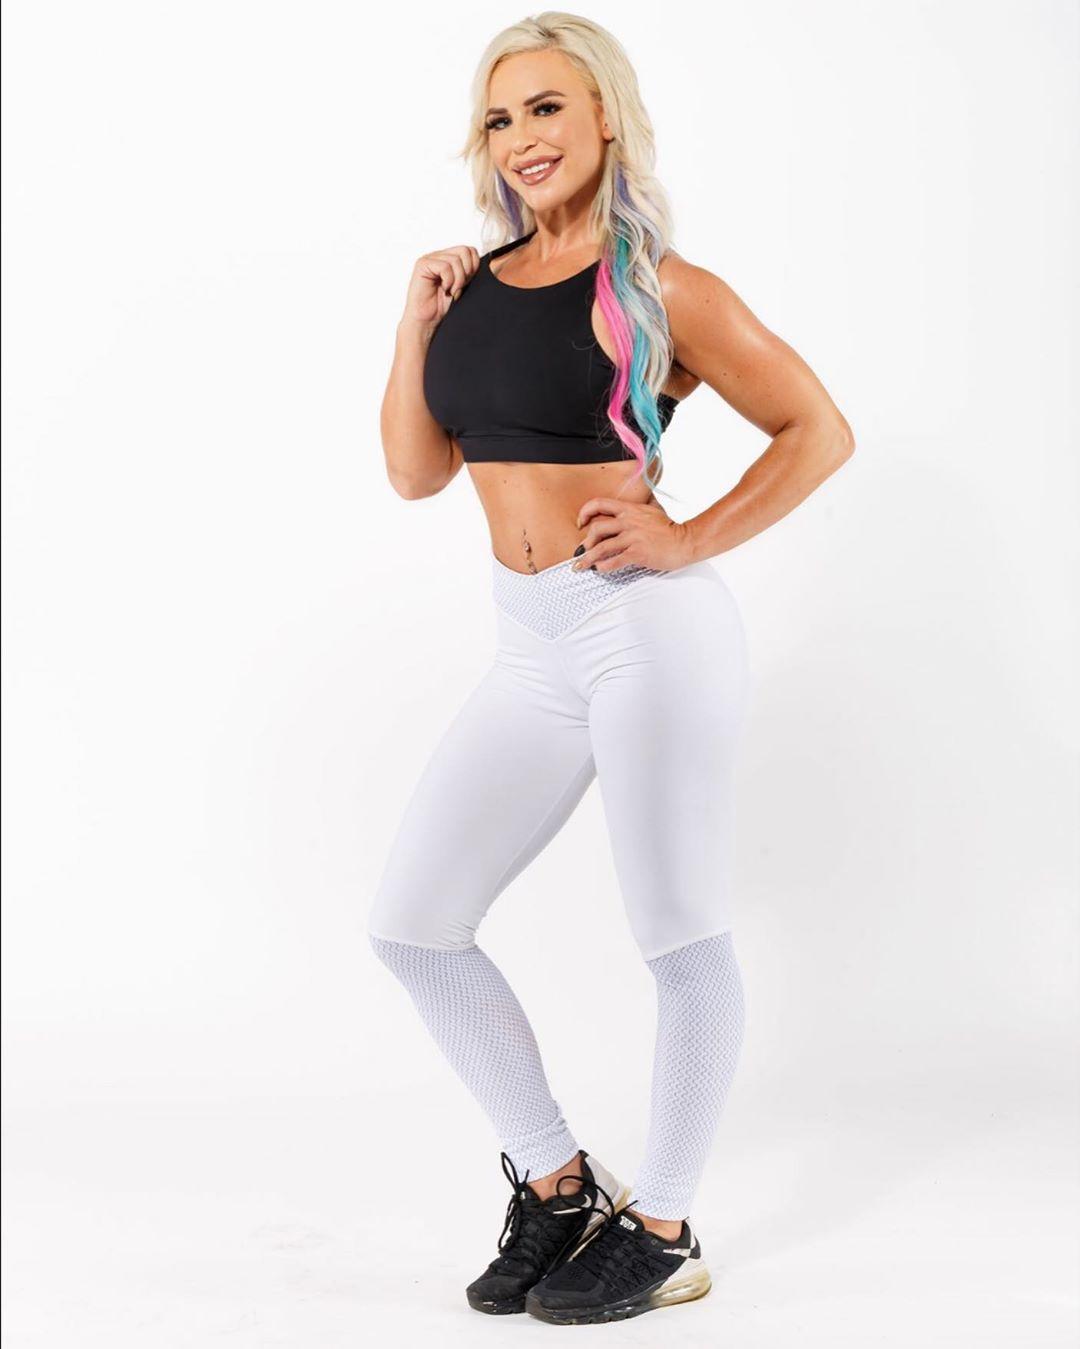 70+ Hot Pictures Of Dana Brooke Show Off This WWE Diva’s Sexy Body 582